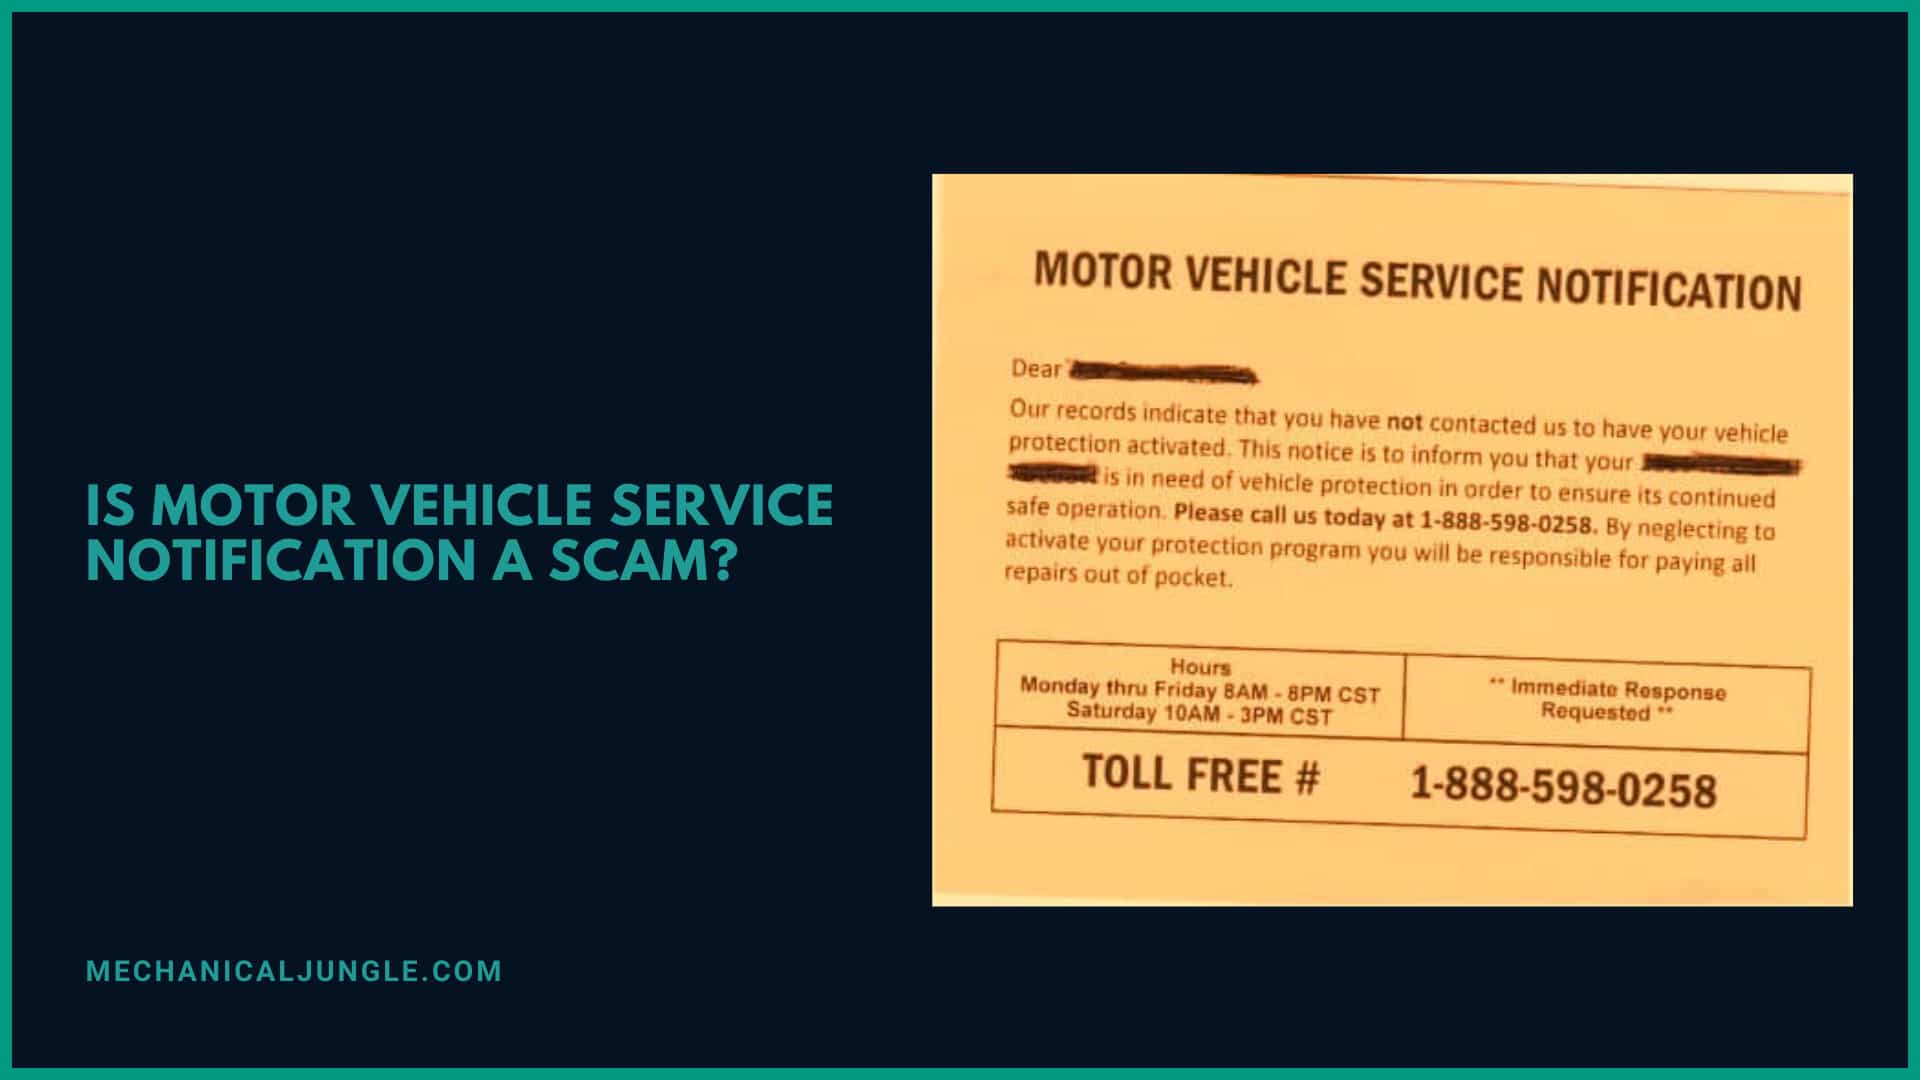 Is Motor Vehicle Service Notification a Scam?